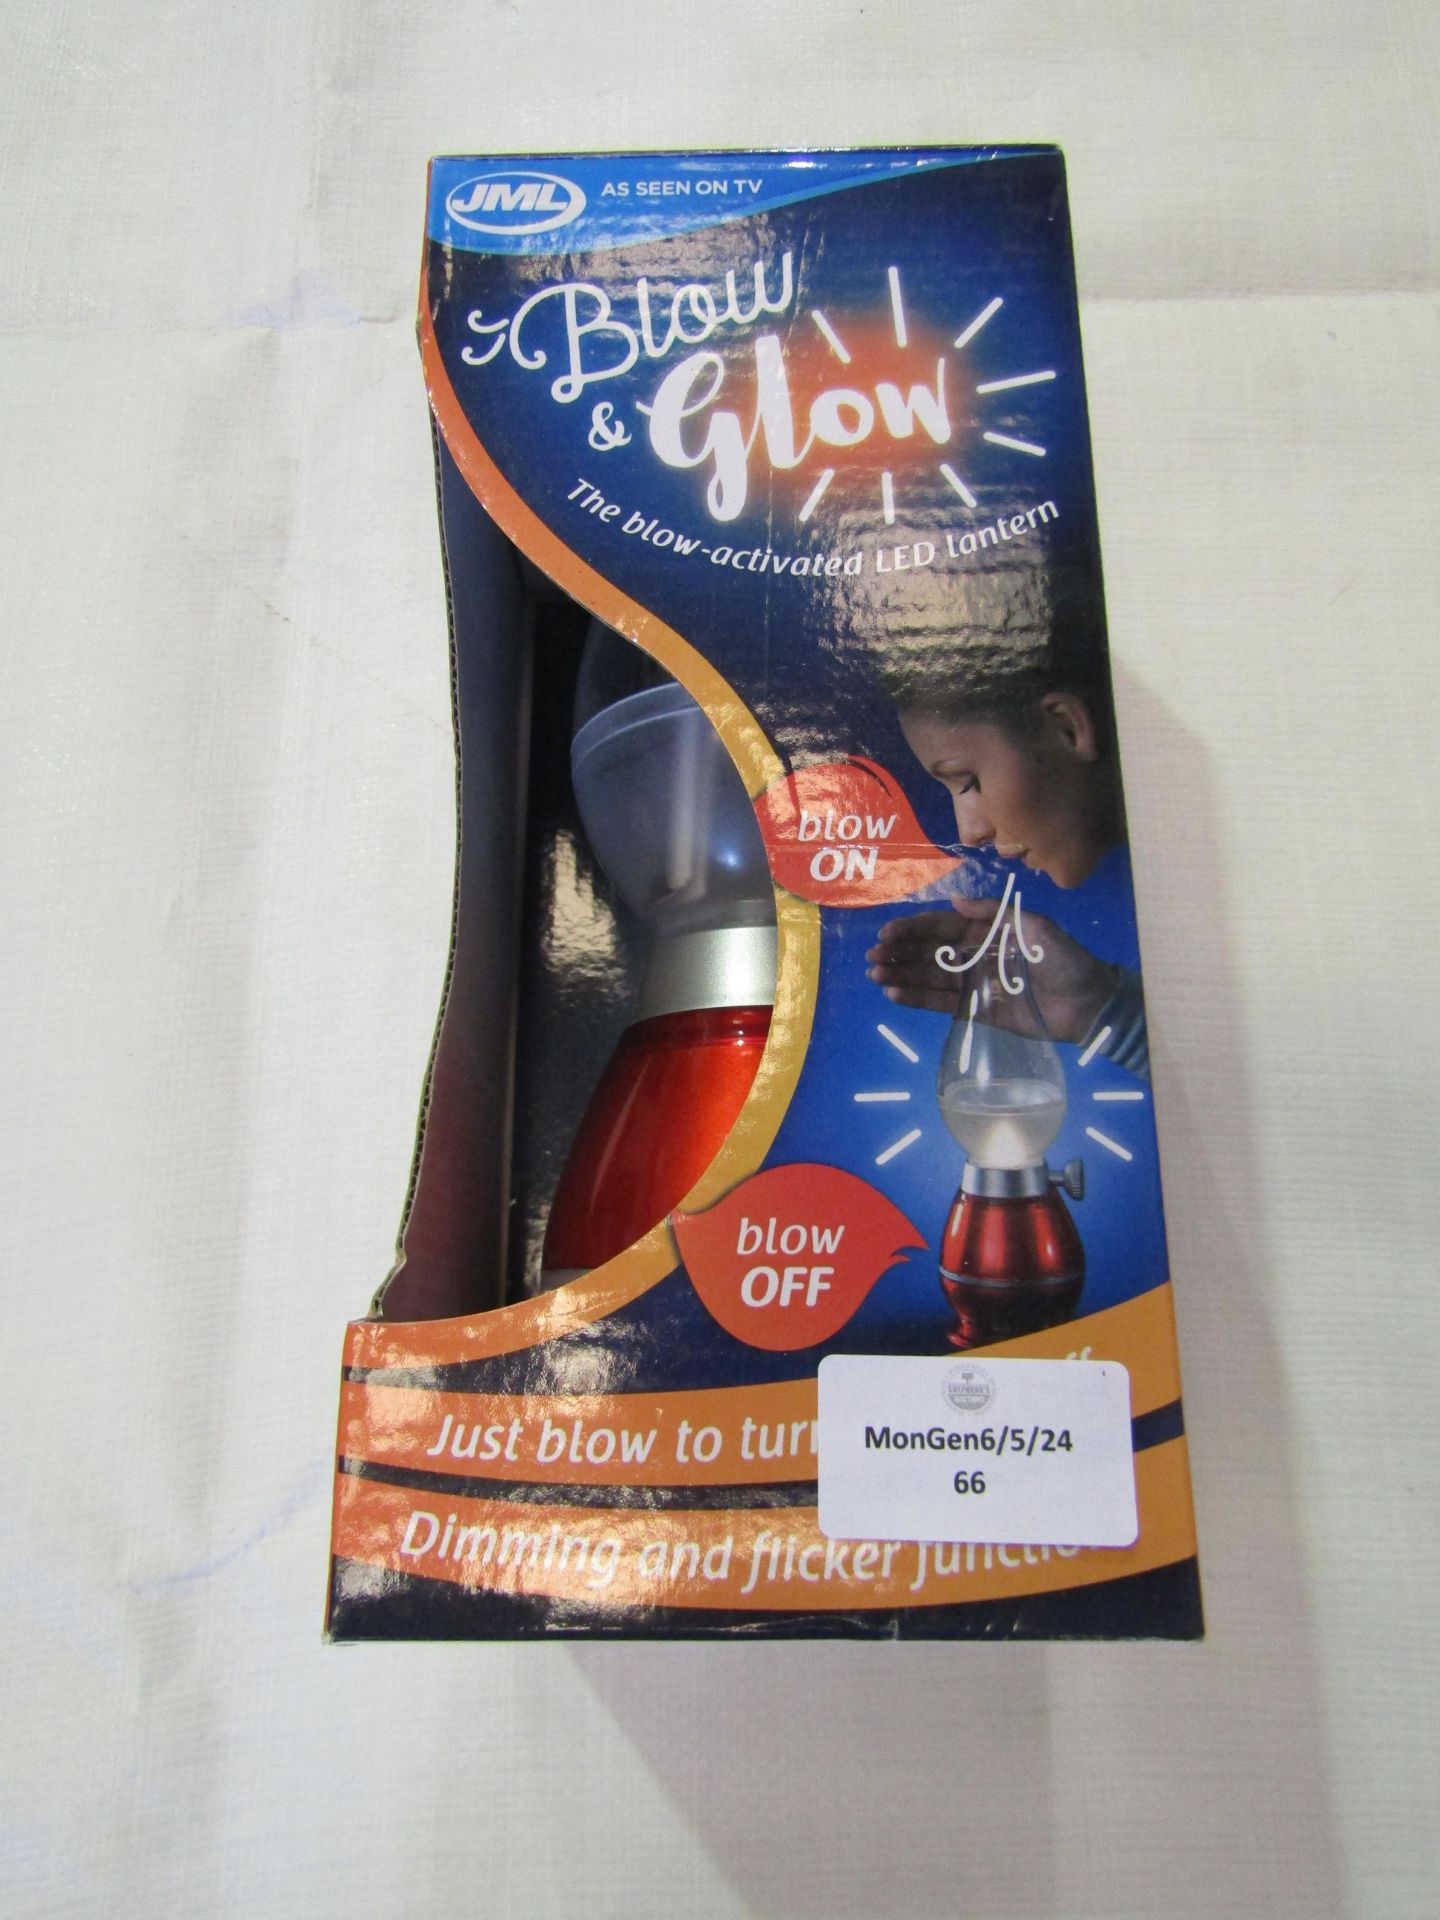 JML Blow & Glow The Blow Activated LED Lantern - Unchecked & Boxed.